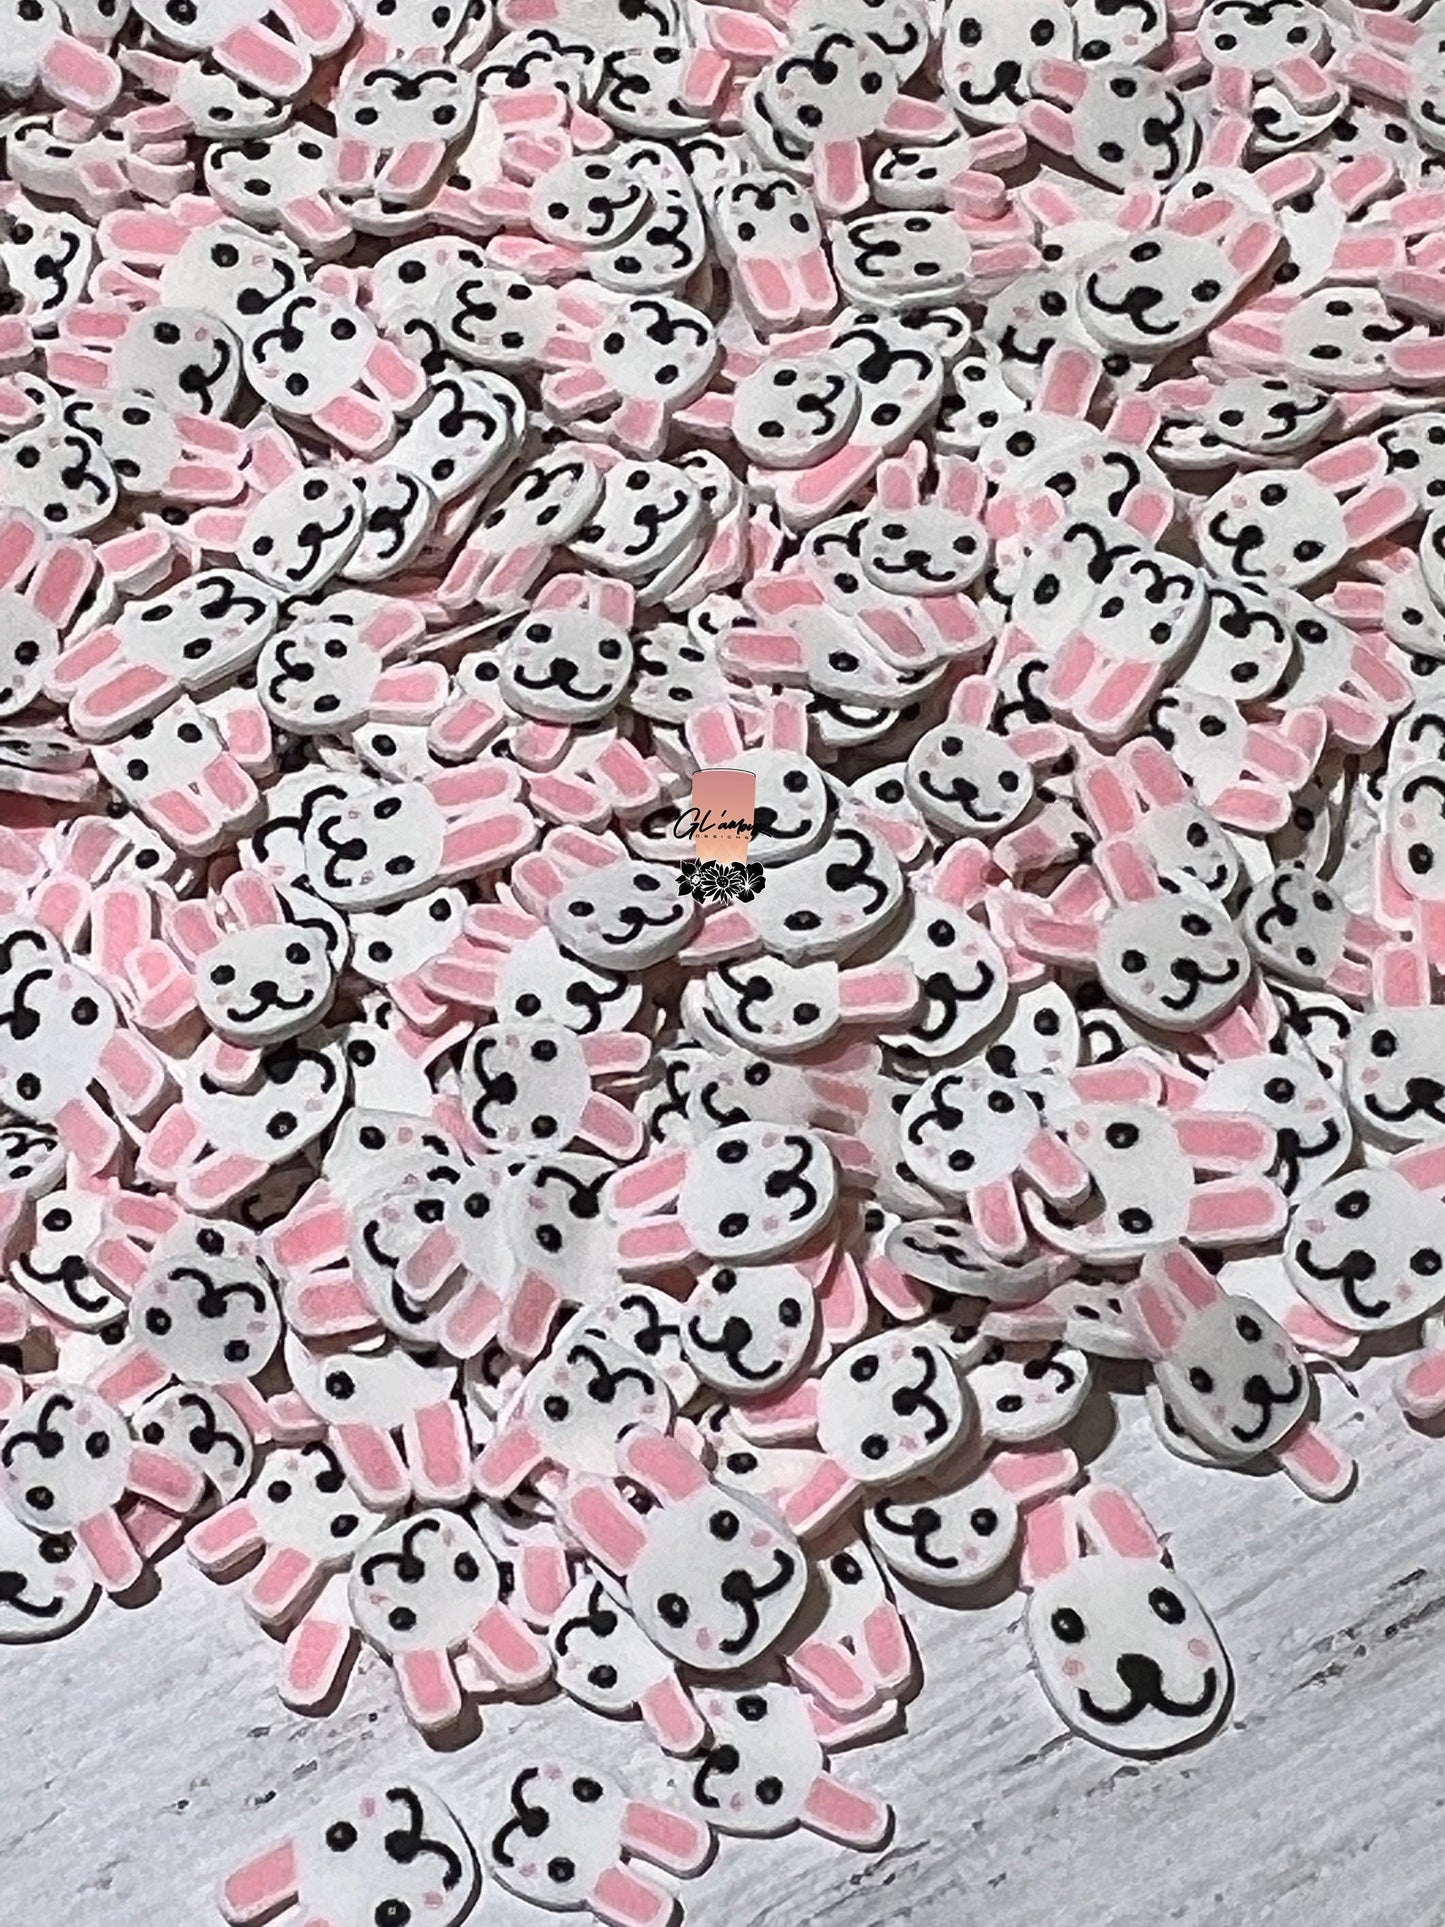 White and Pink Rabbit Head Polymer Slices - small 5mm